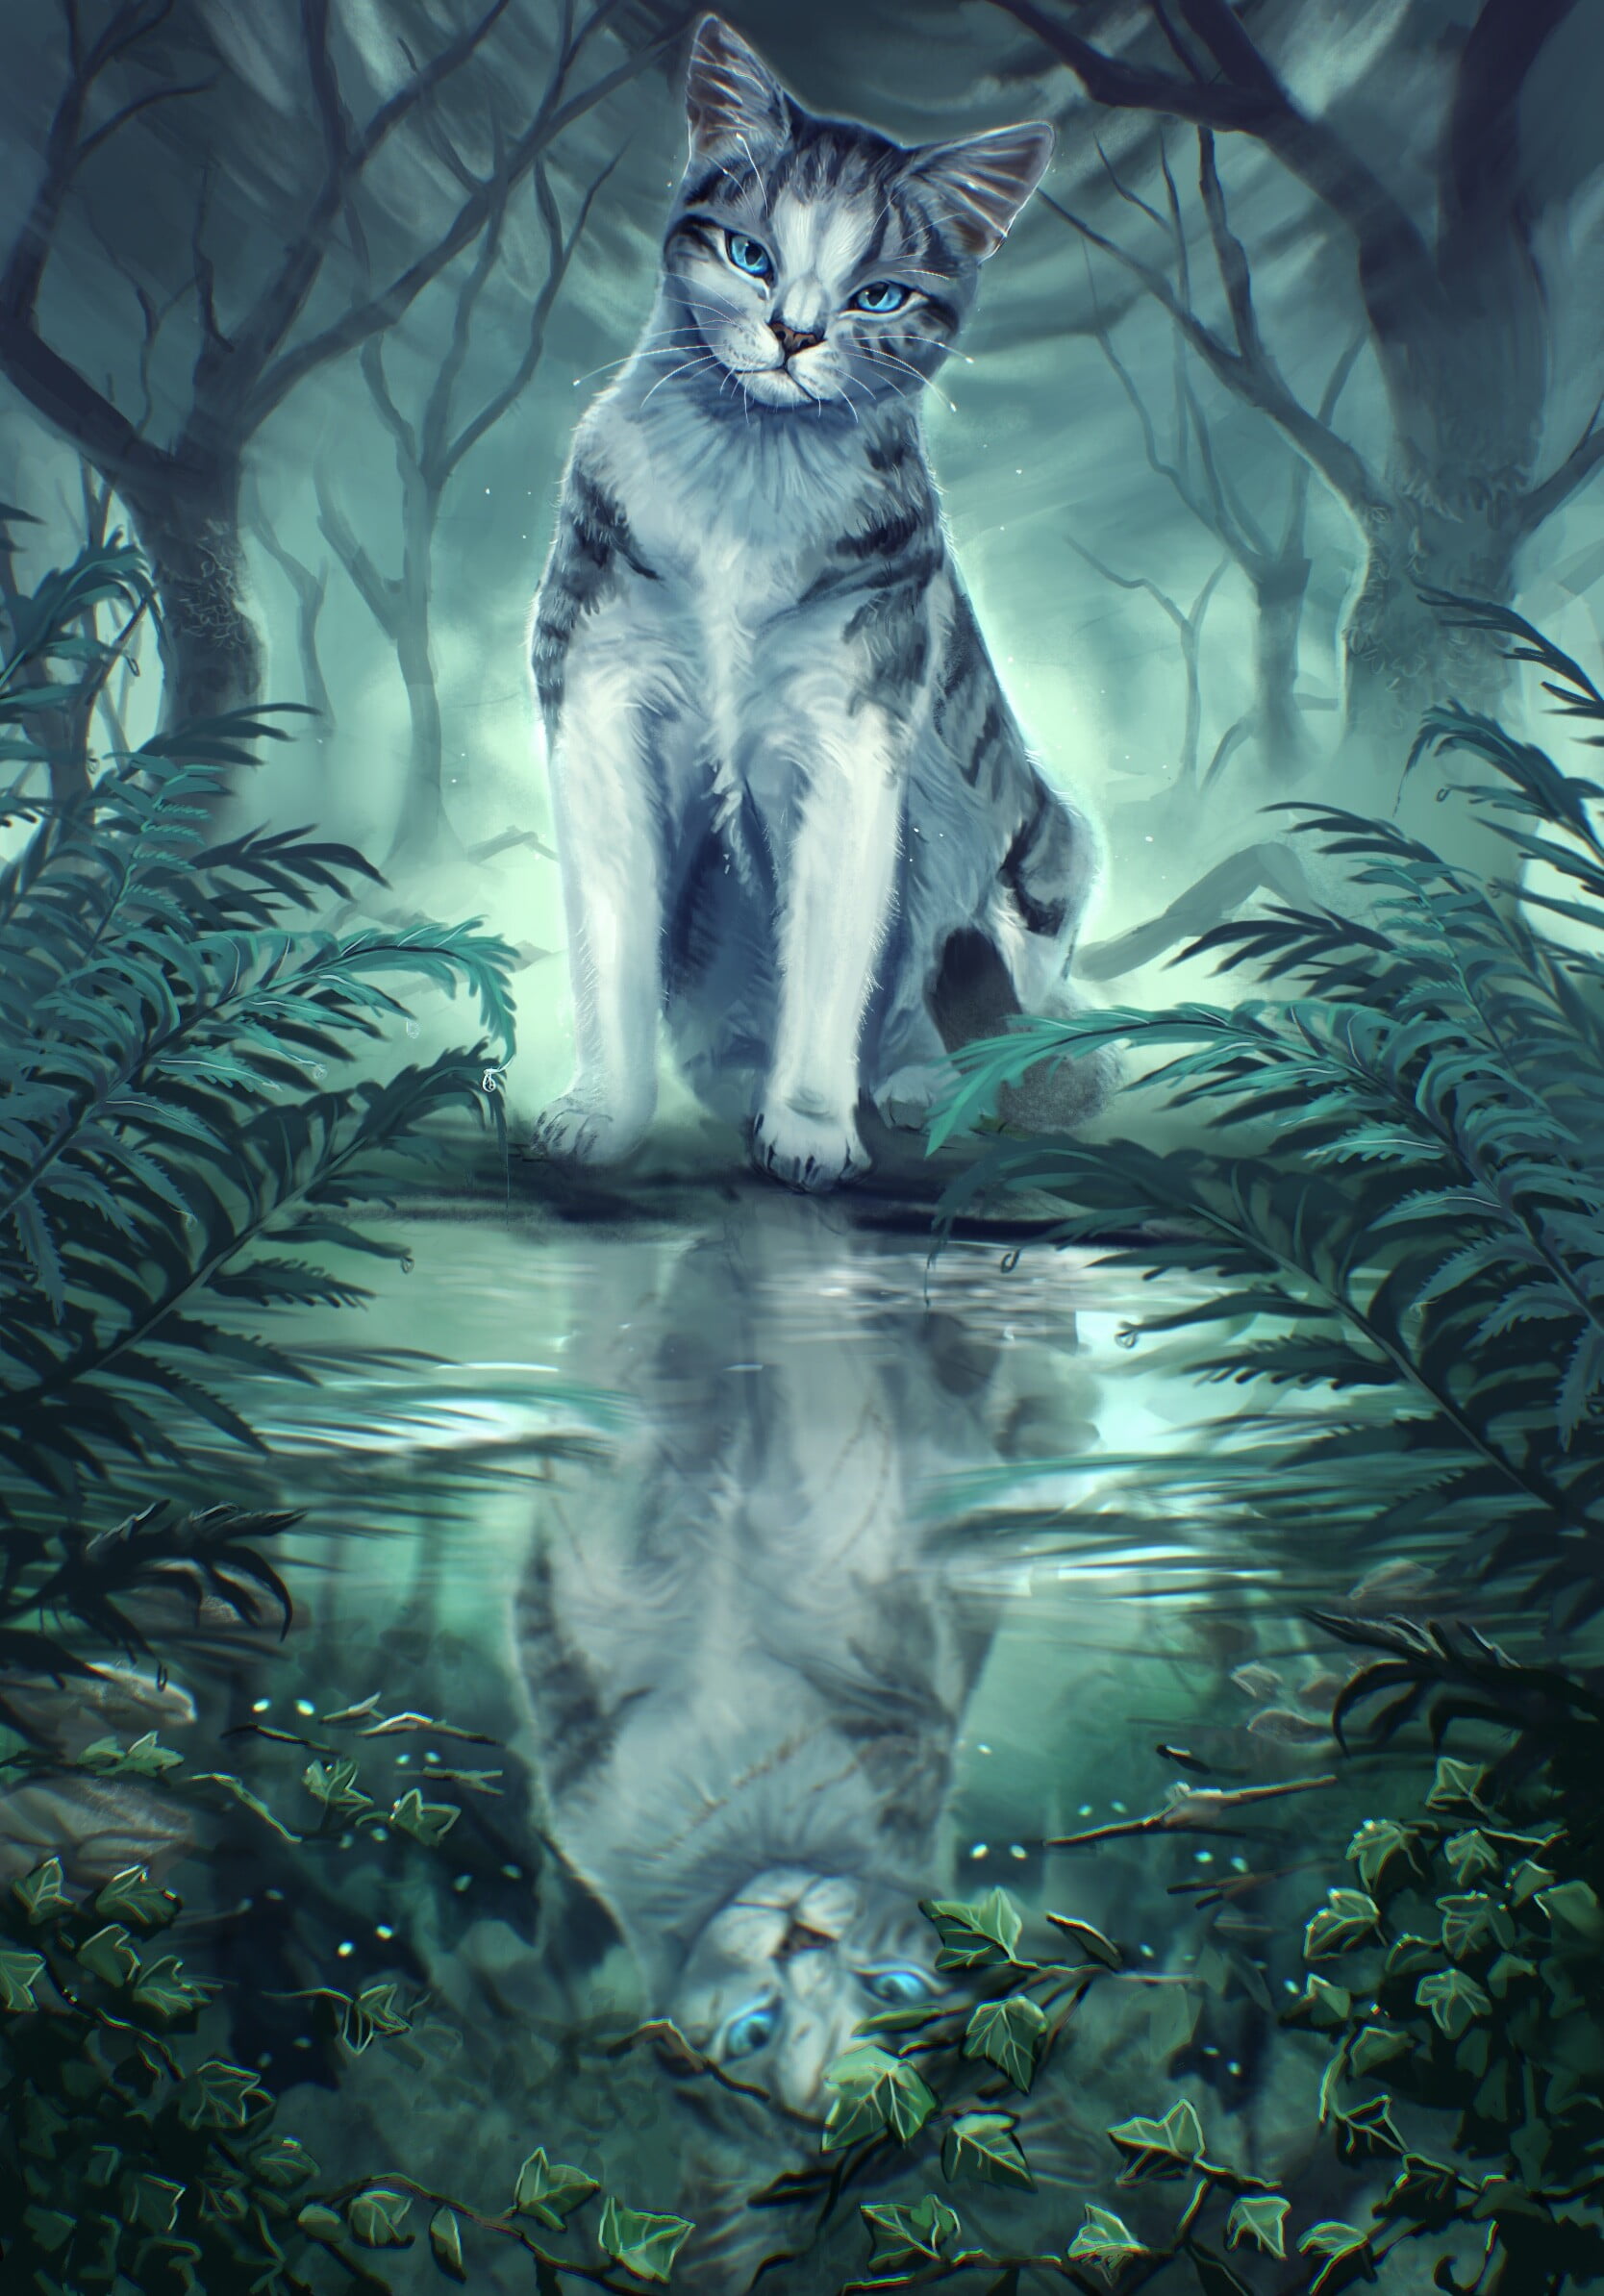 [Ivypool sits in front of a pool of water in the forest. Her reflection has scars and shadowy cats around her]